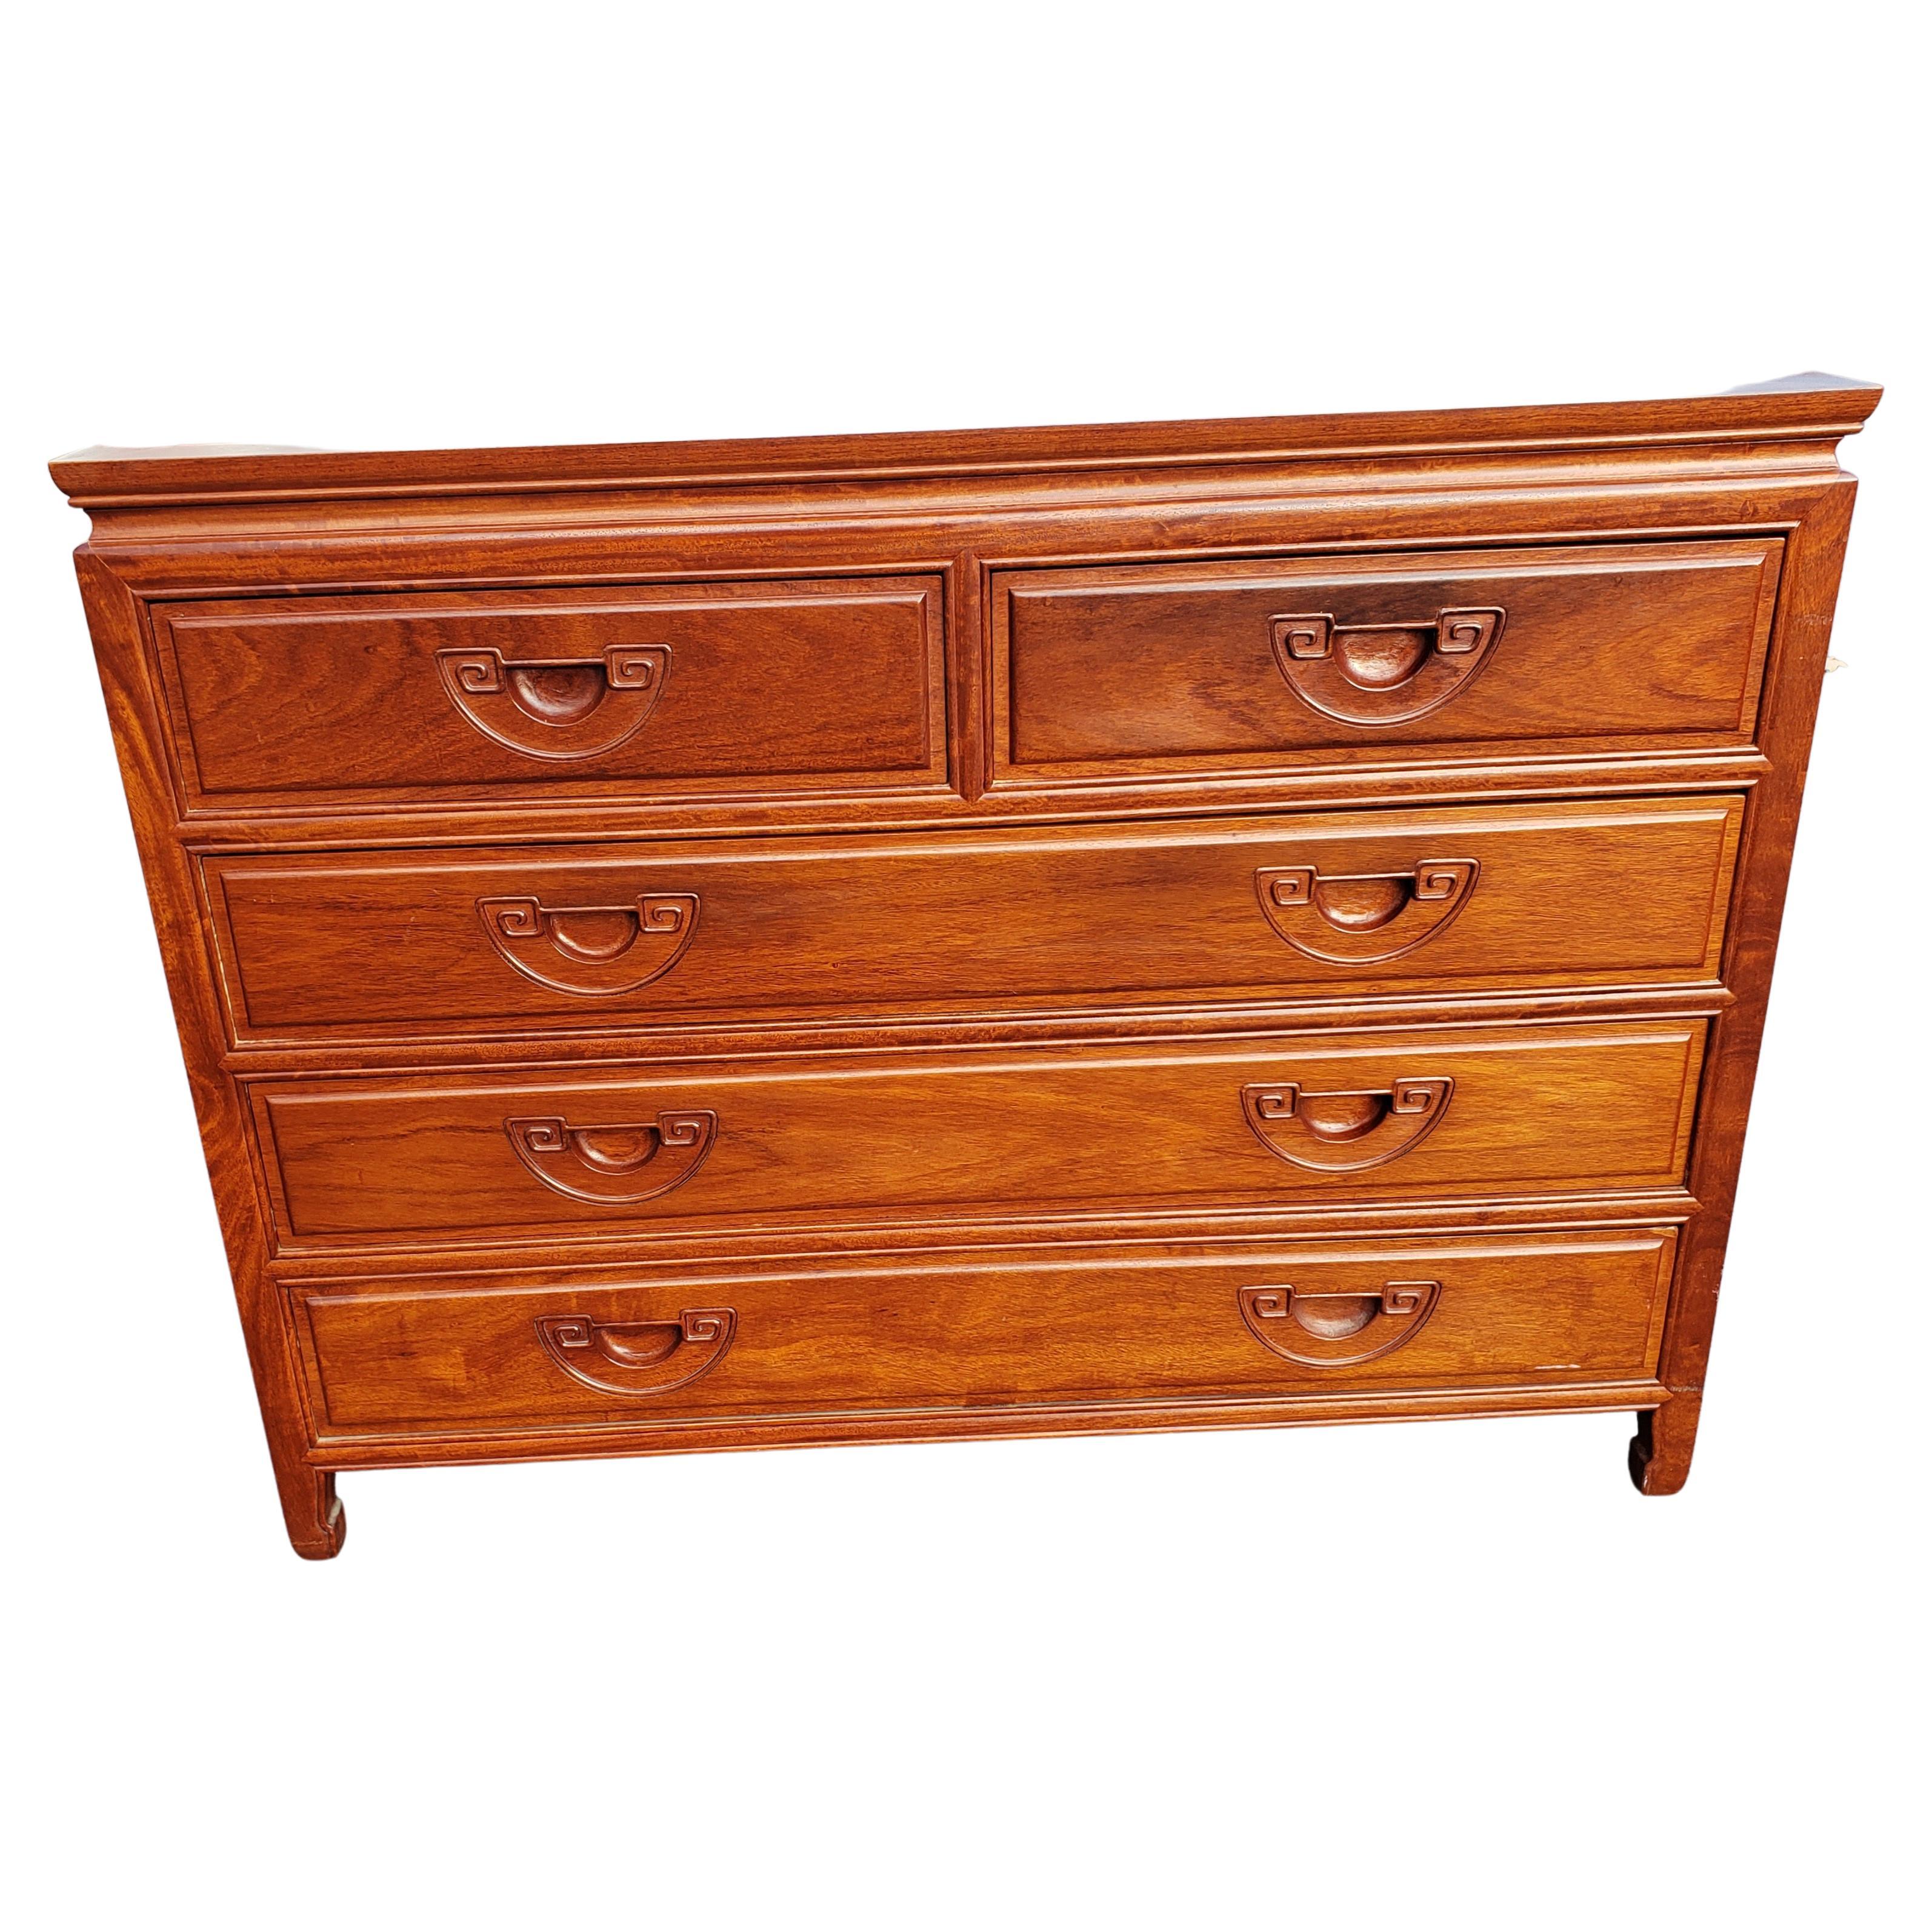 George Zee Rosewood Hand Crafted Dresser Chest W Integrated Carved Handles